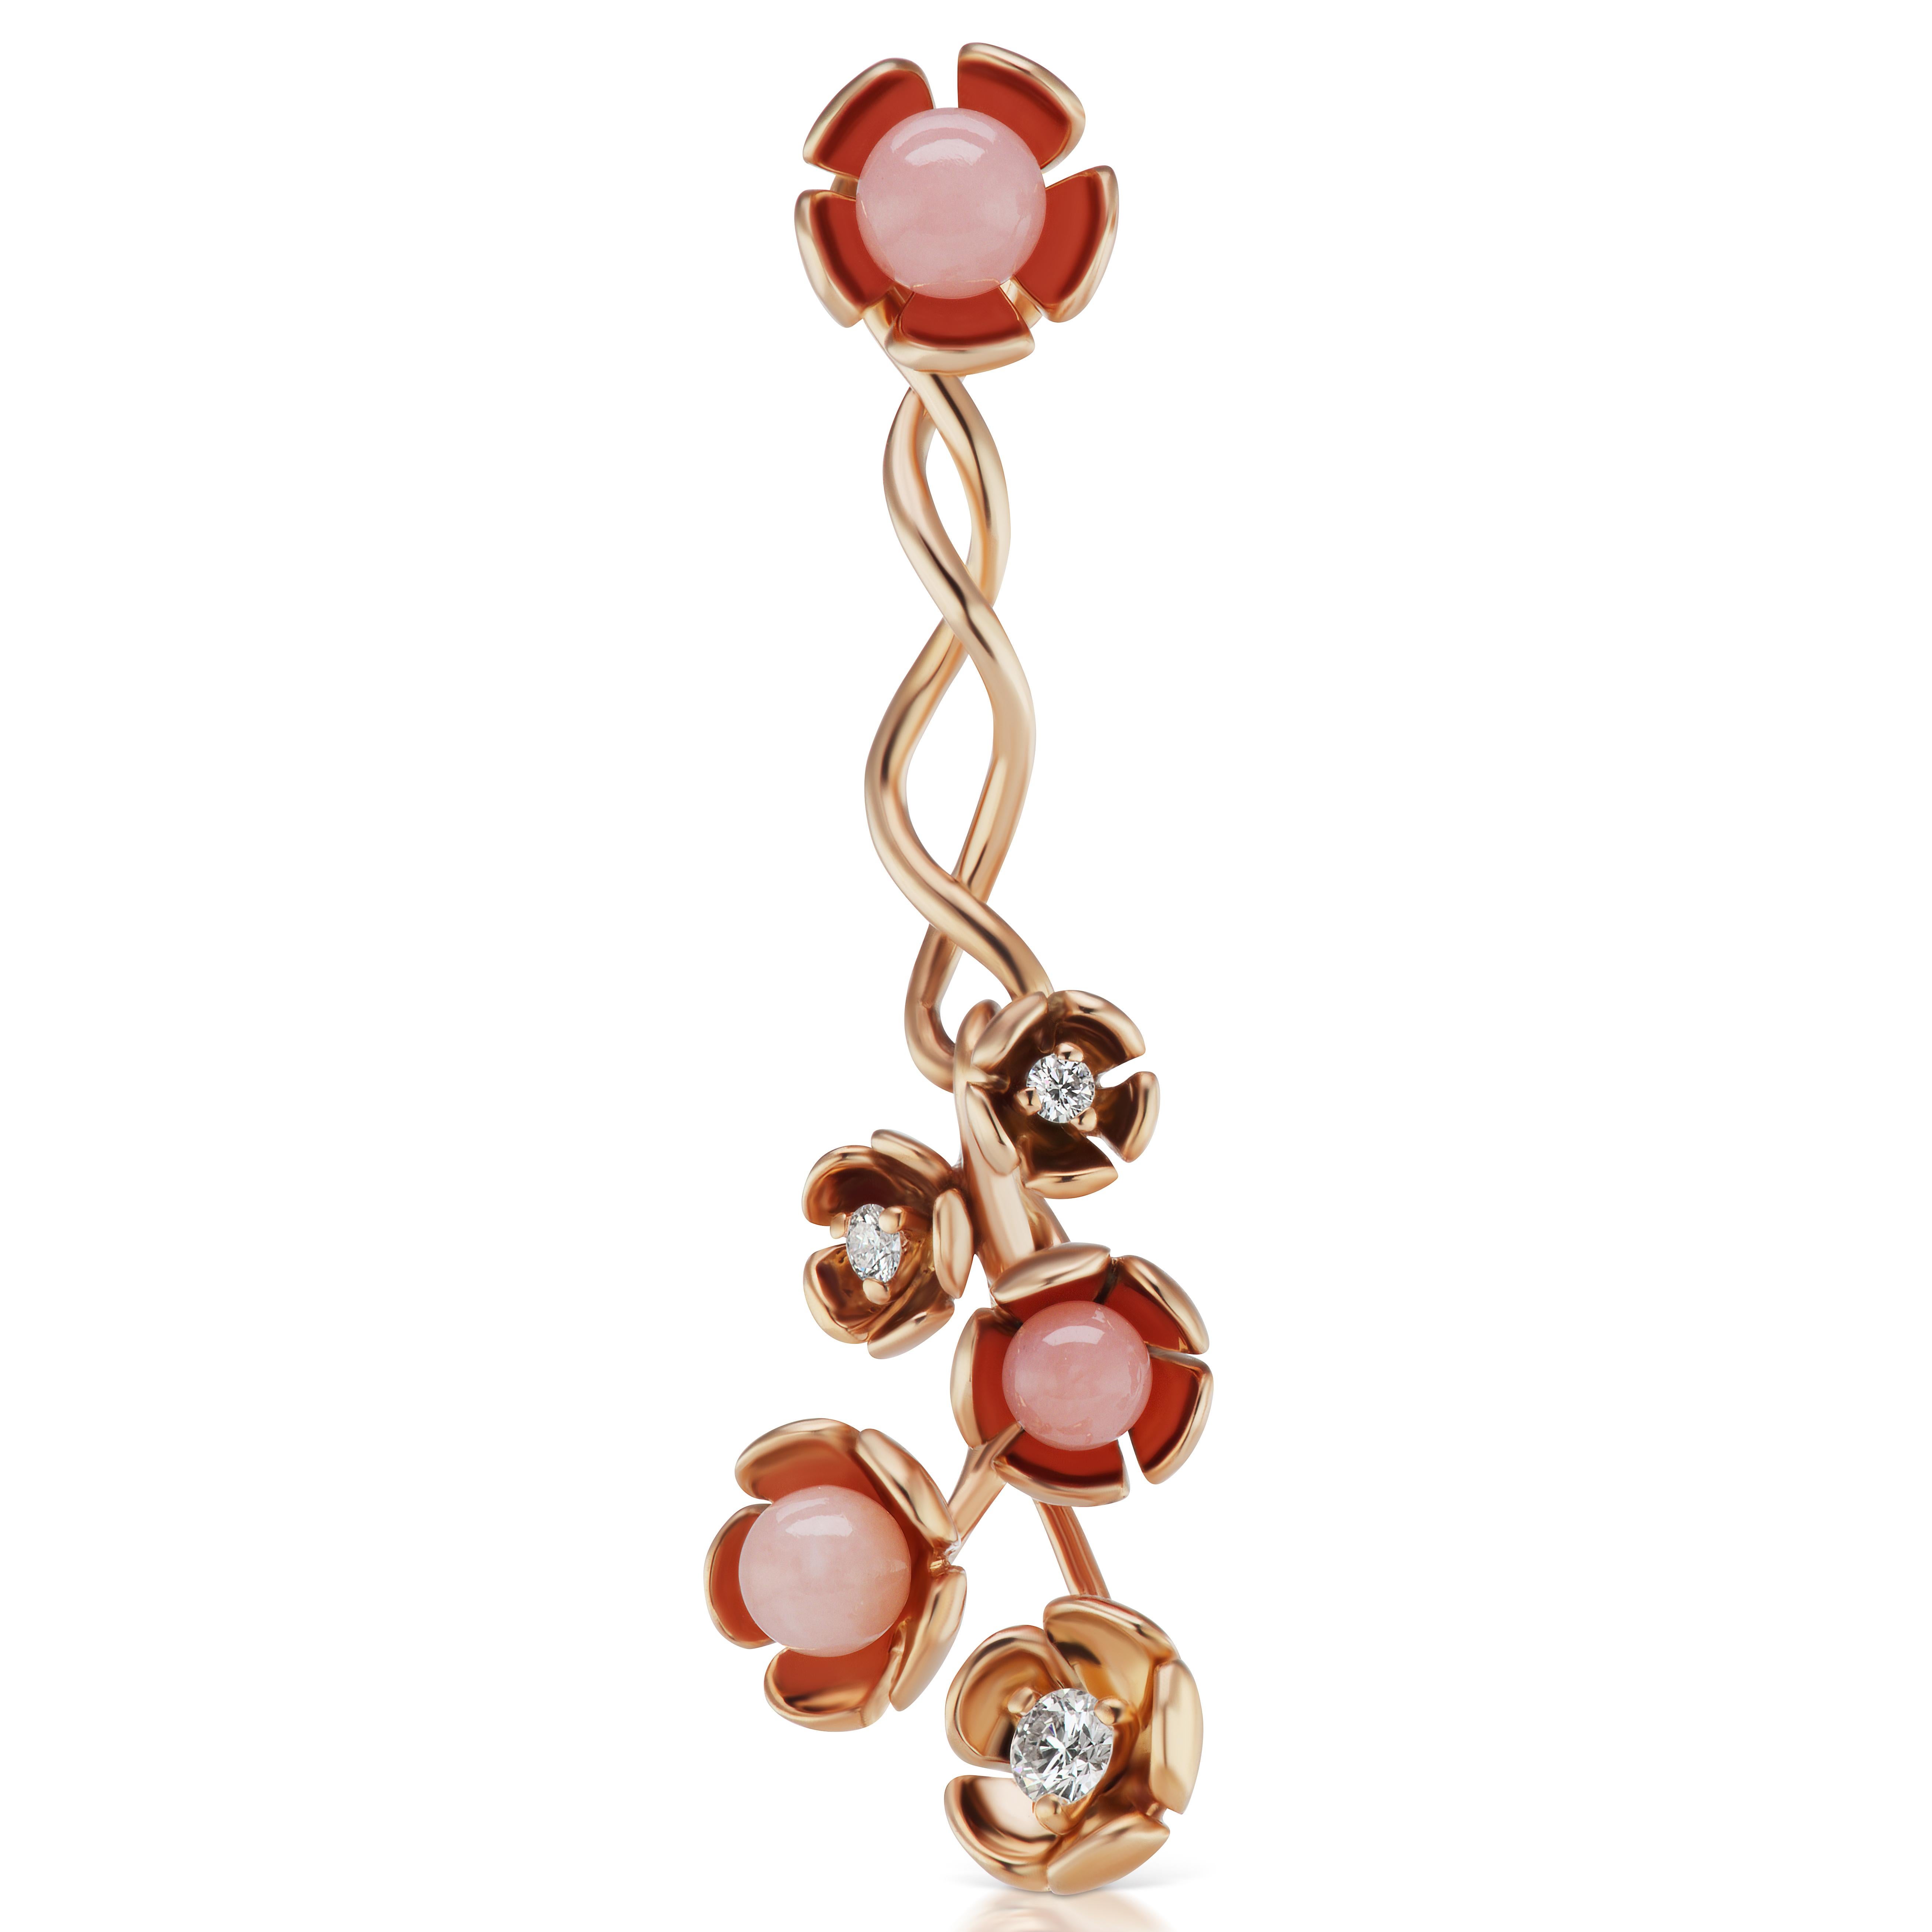 18K Rose Gold Vine Earrings with Enamel and Pink Opal Flowers and Diamond Accents.
0.20 ct tw.
2